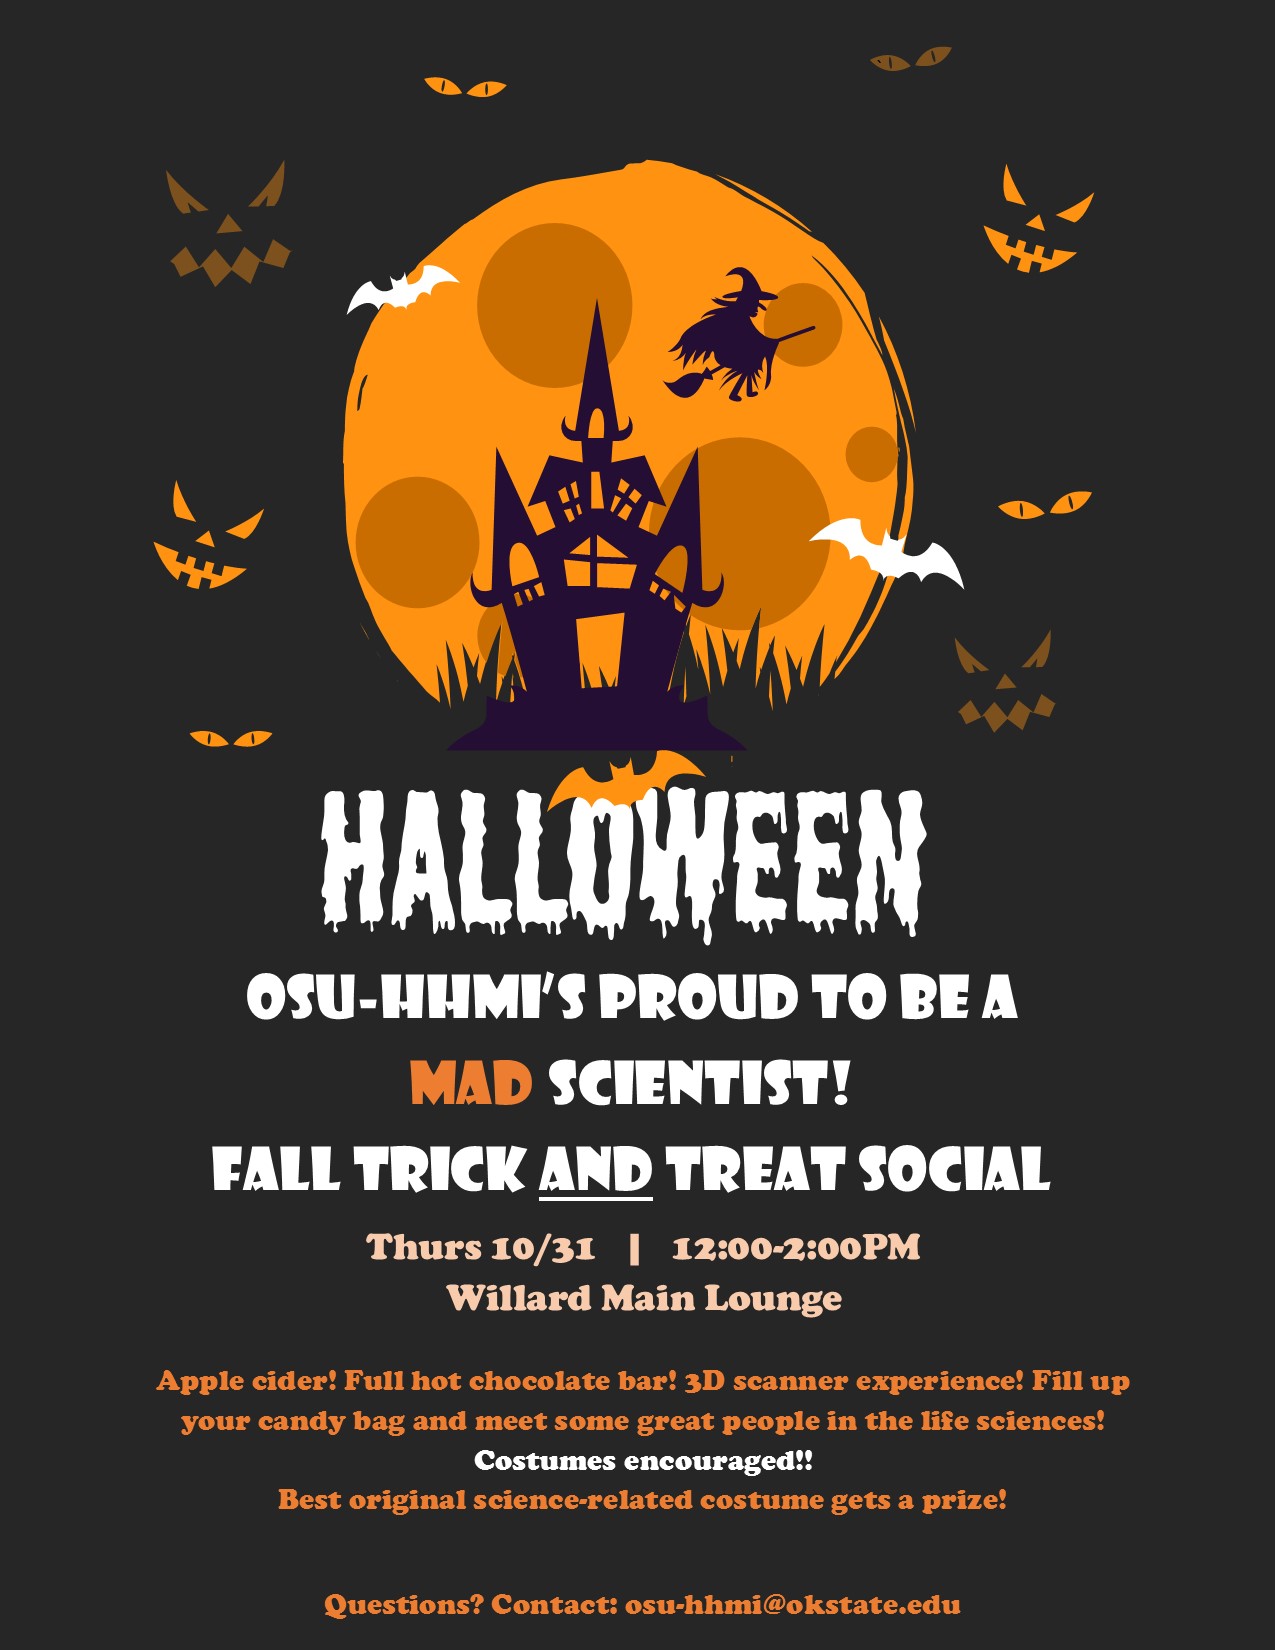 Have fun this Halloween at our Fall Social!